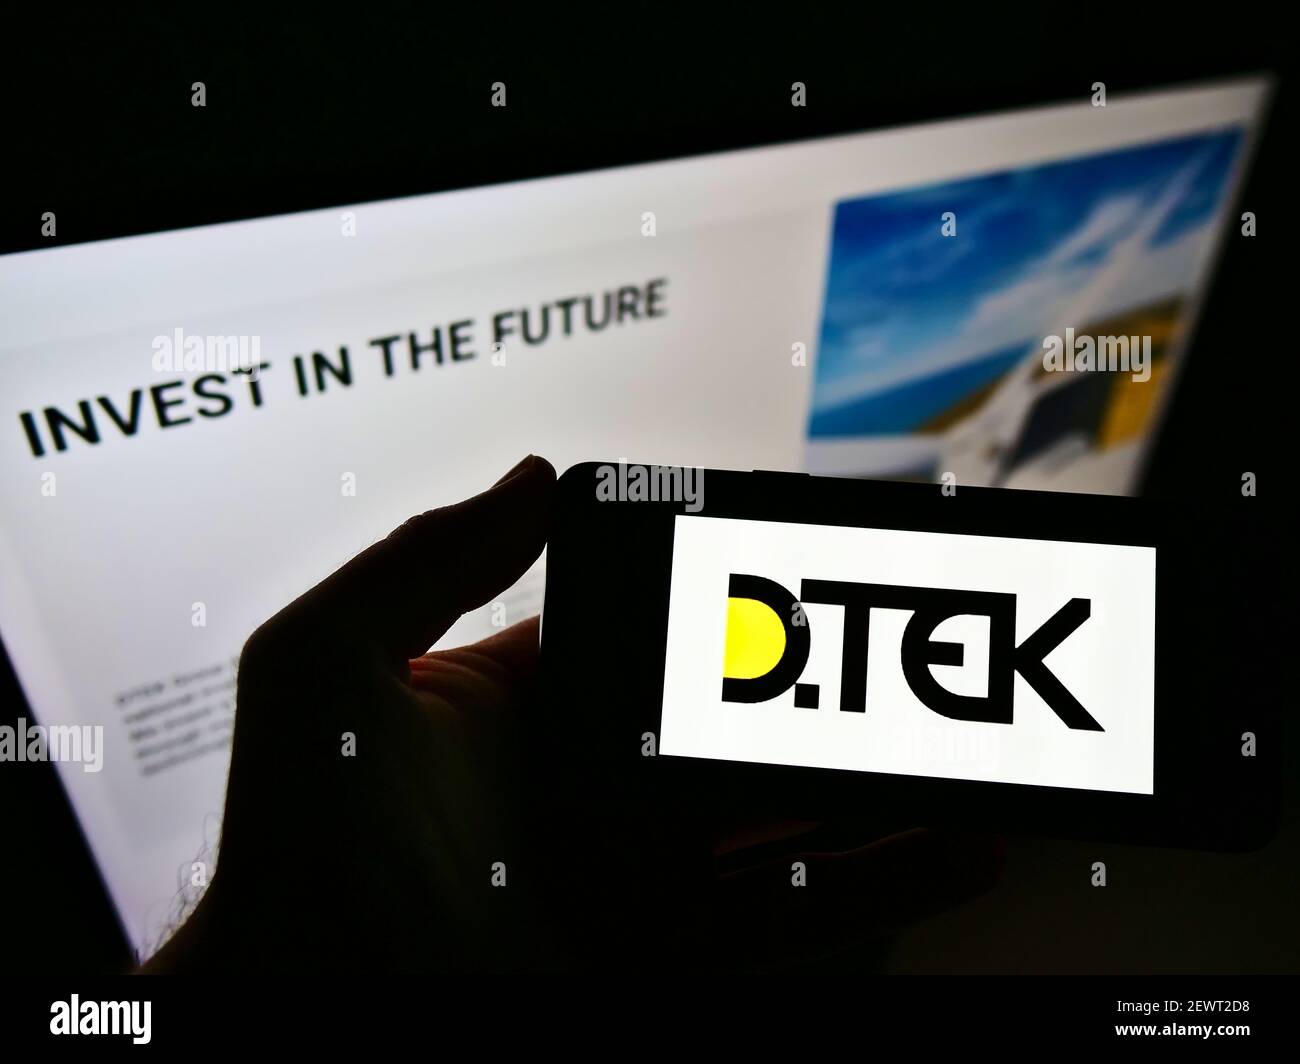 Person holding smartphone with logo of Ukrainian energy company DTEK on screen in front of website. Focus on phone display. Unmodified photo. Stock Photo